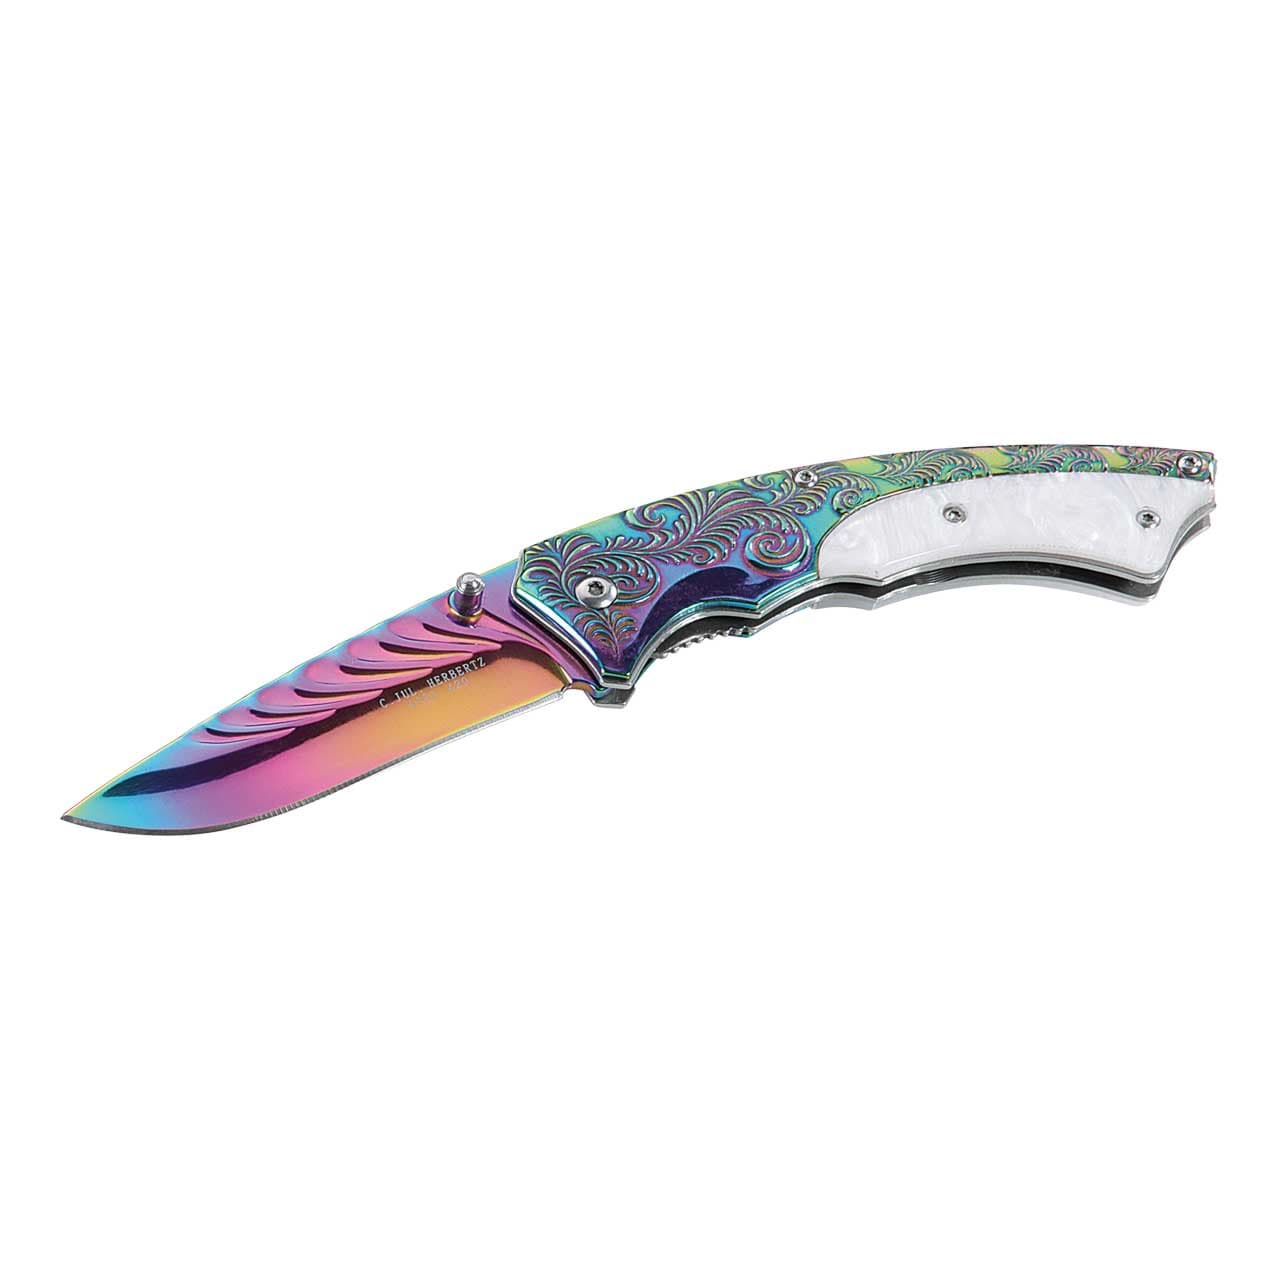 Picture of Herbertz - One-Handed Knife 233511